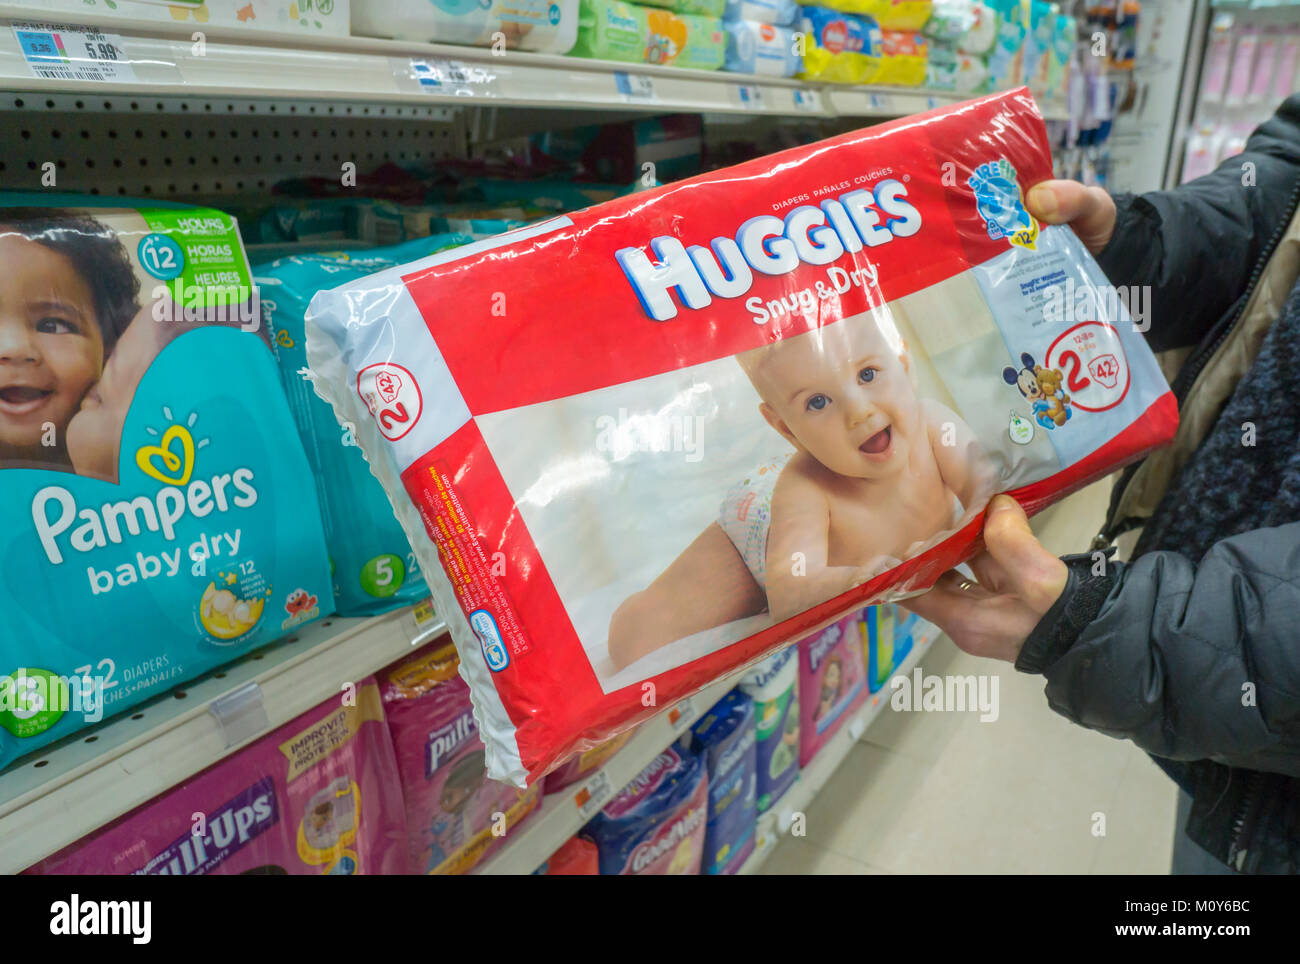 A shopper chooses a package of Huggies brand disposable diapers by Kimberly-Clark in a supermarket in New York on Tuesday, January 23, 2018. Kimberly-Clark announced that it will cut 5000 jobs, 13 percent of its workforce, and close or sell 10 facilities in order to achieve $2 billion in reduced costs.  (Â© Richard B. Levine) Stock Photo